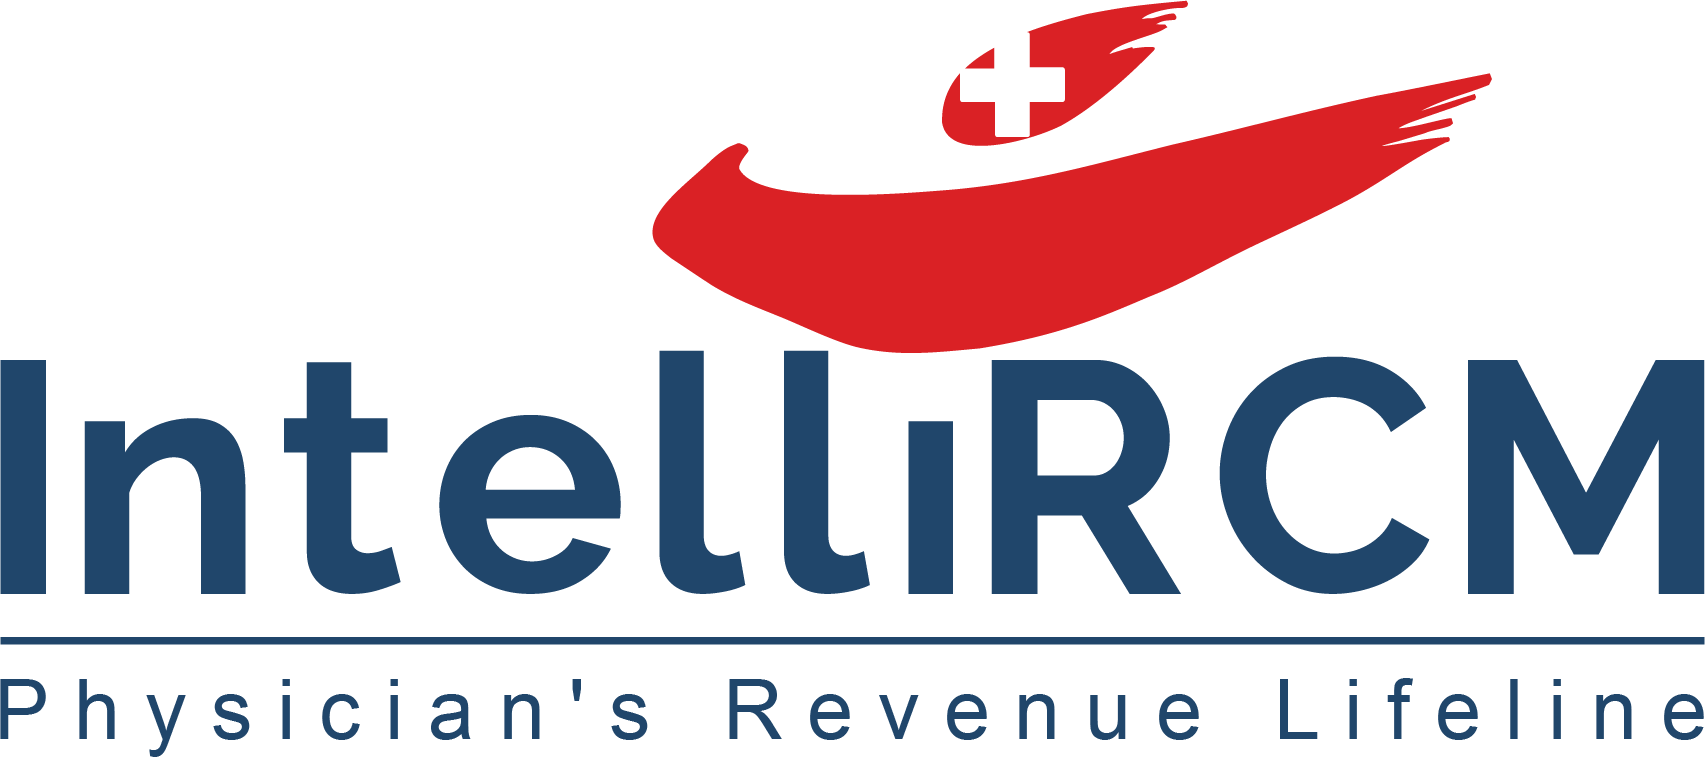 Billing Issues That Affect a Practice’s Revenue Cycle